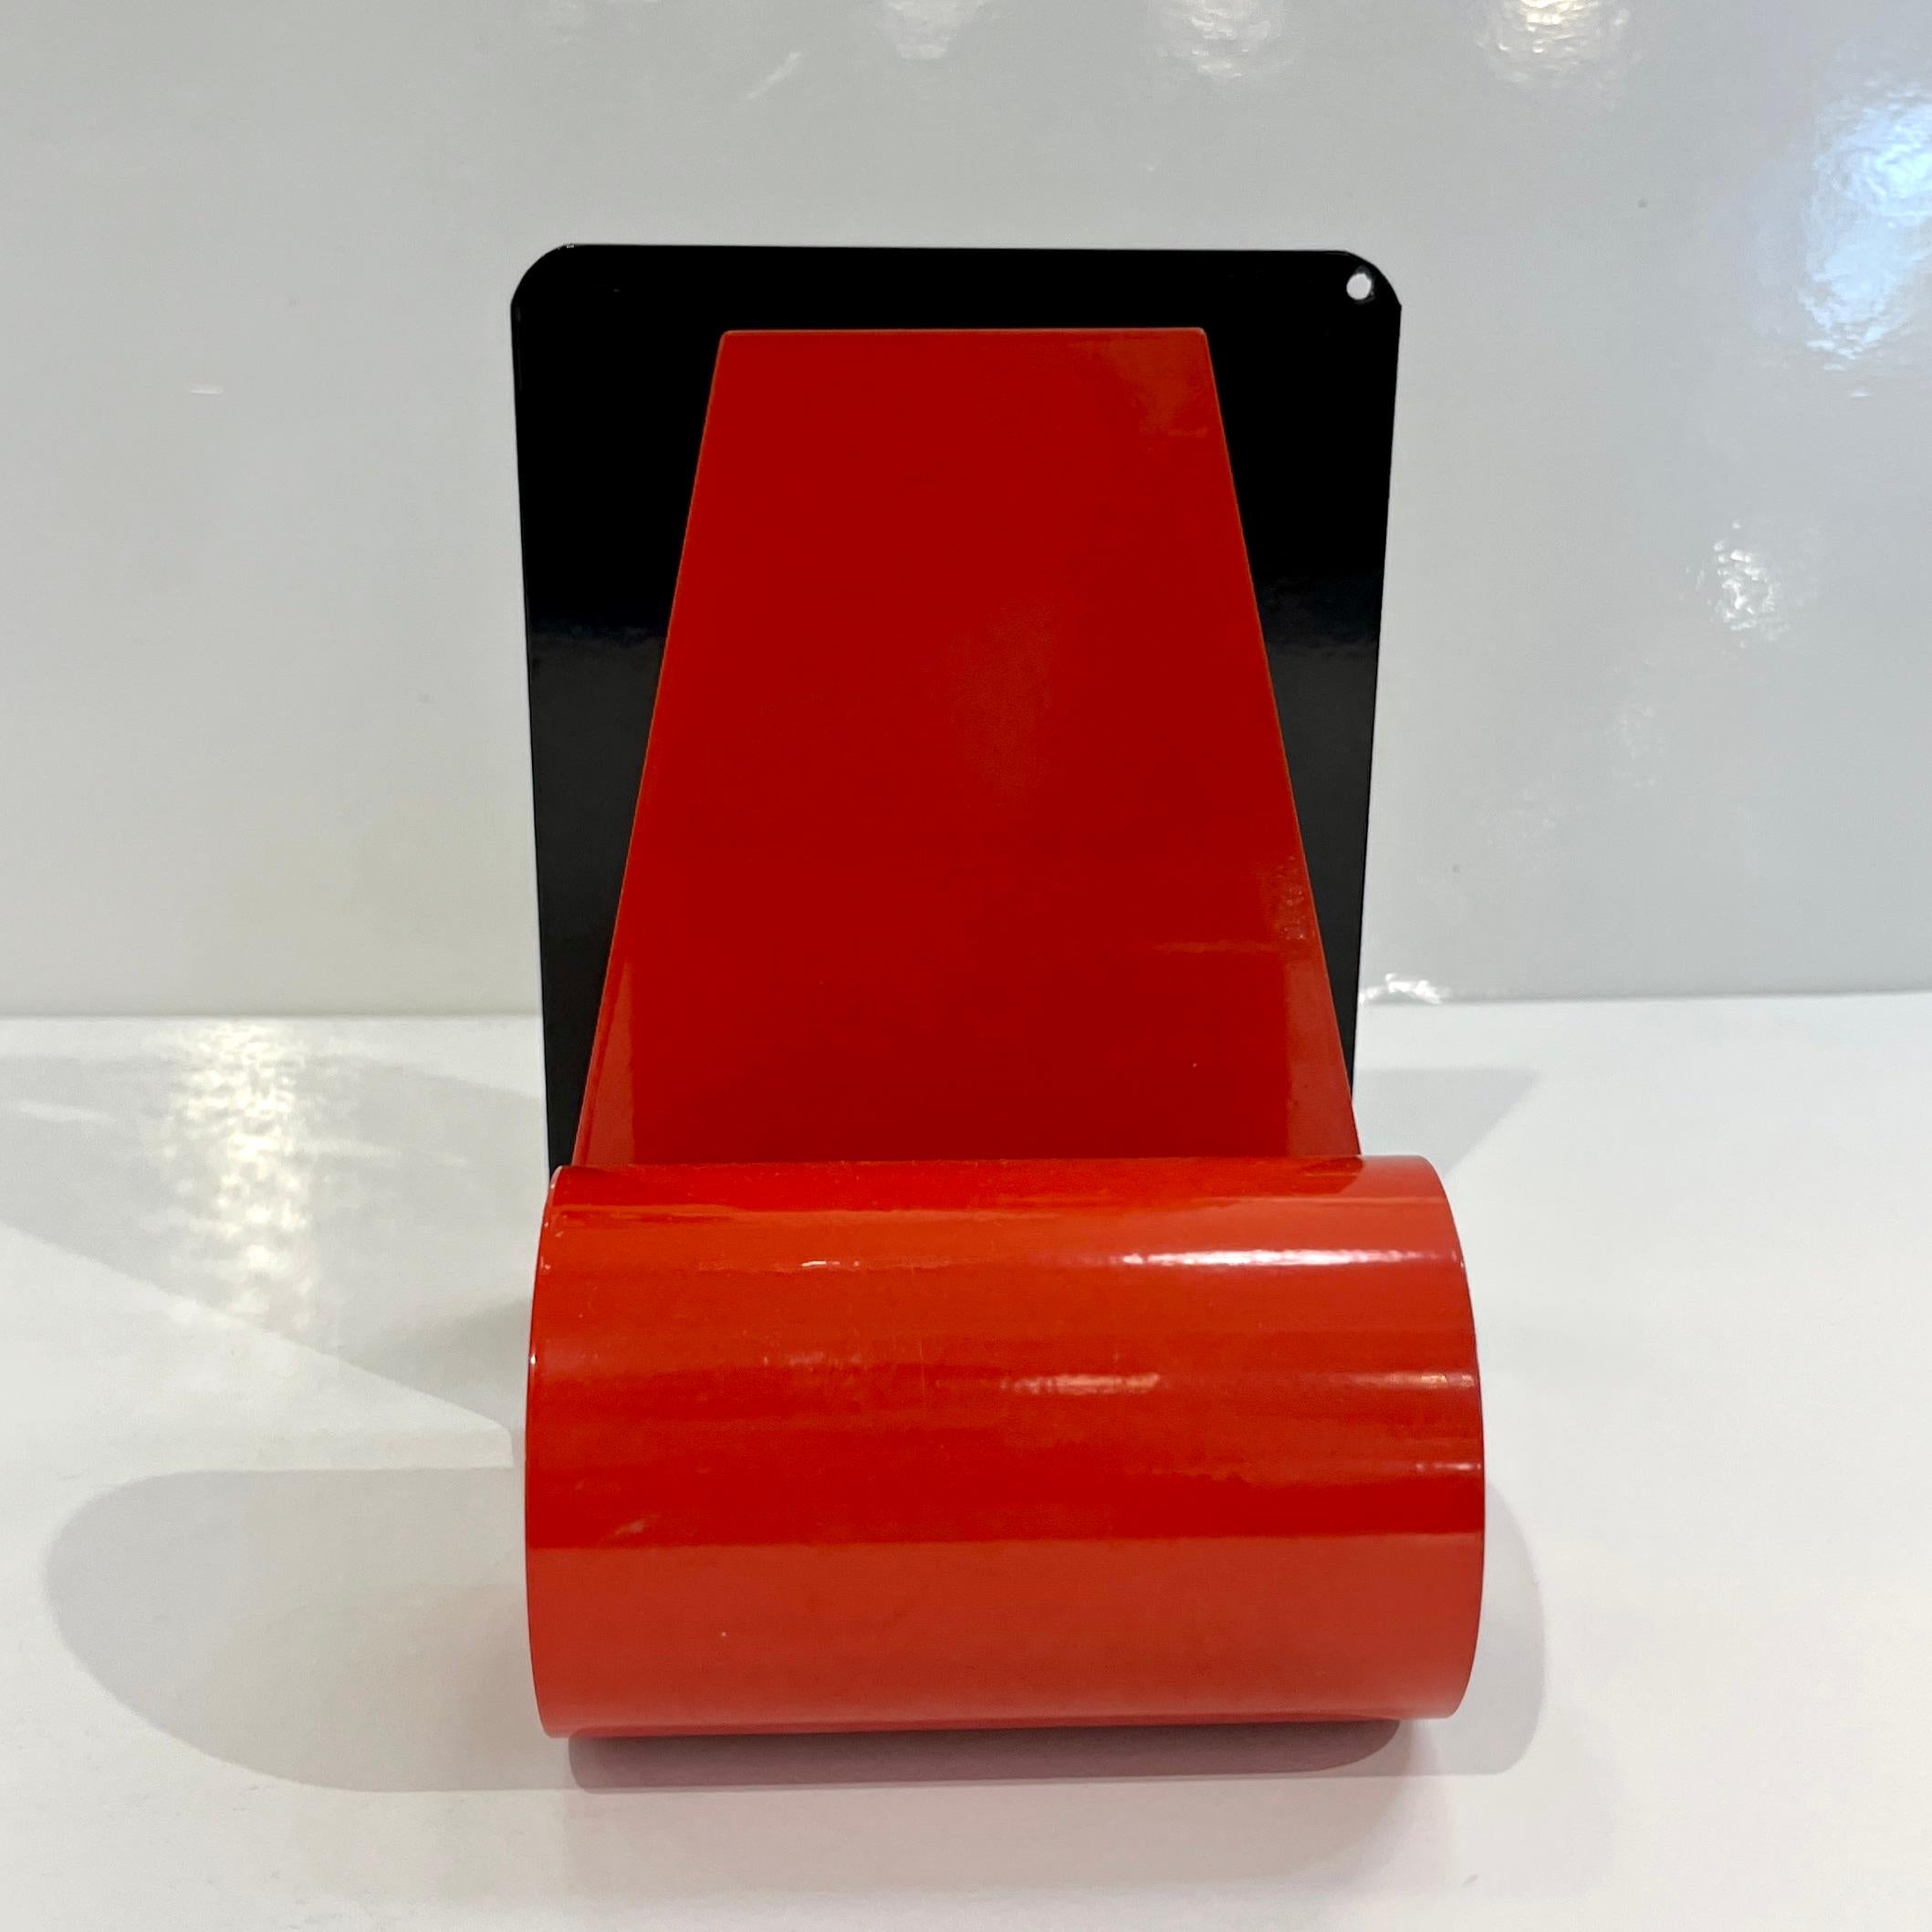 1970s Italian Vintage Red & Black Lacquered Metal Post-Modern Geometric Bookends For Sale 4